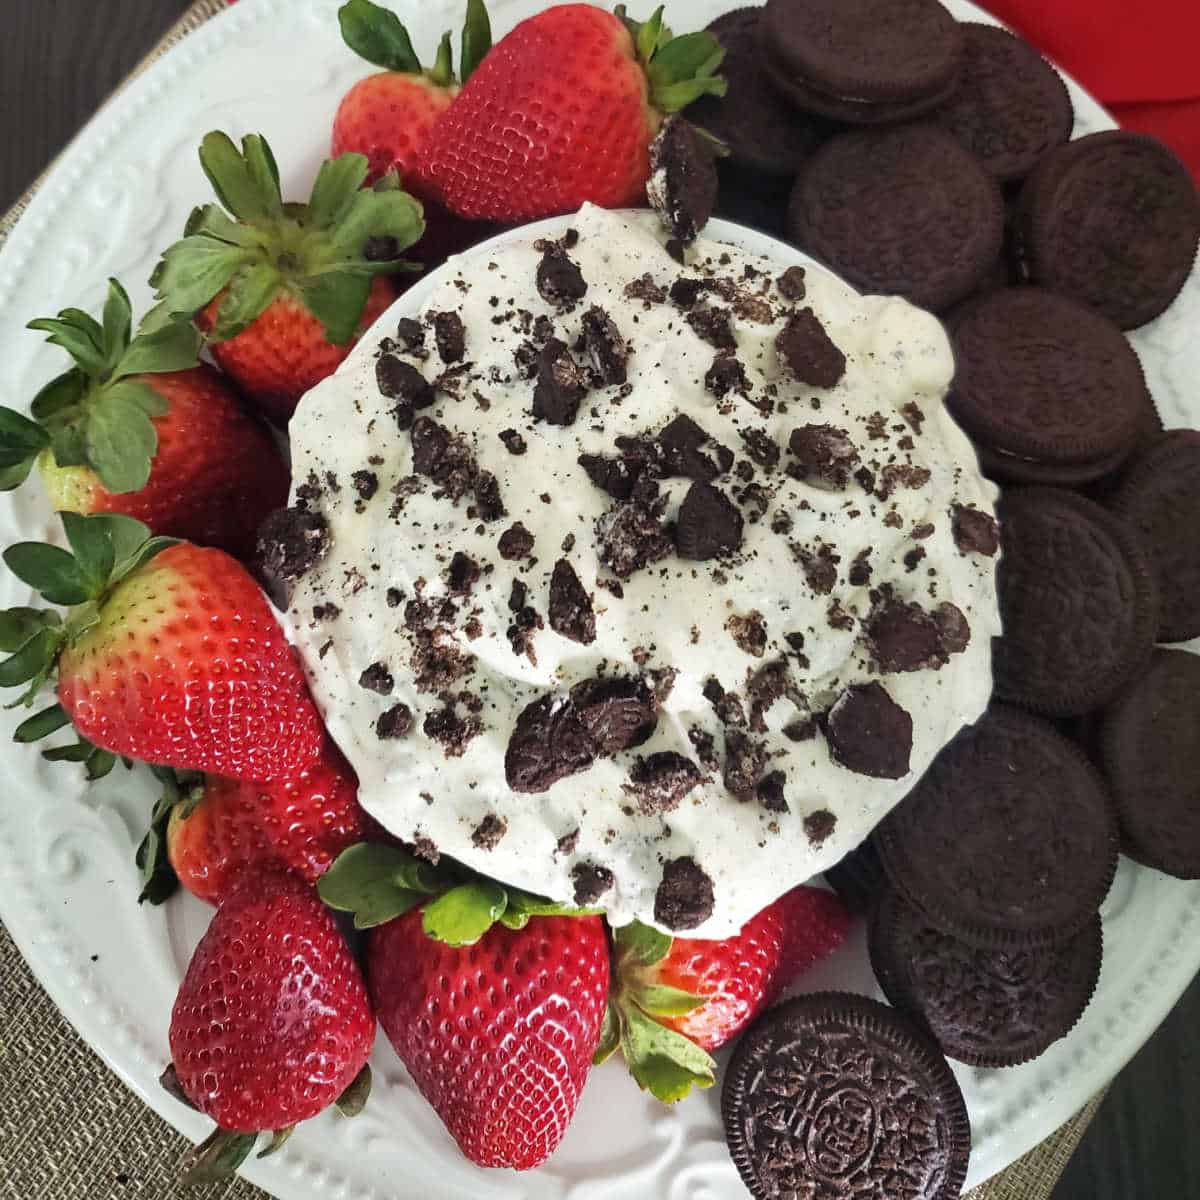 Oreo Fluff in a white bowl next to strawberries and oreo cookies